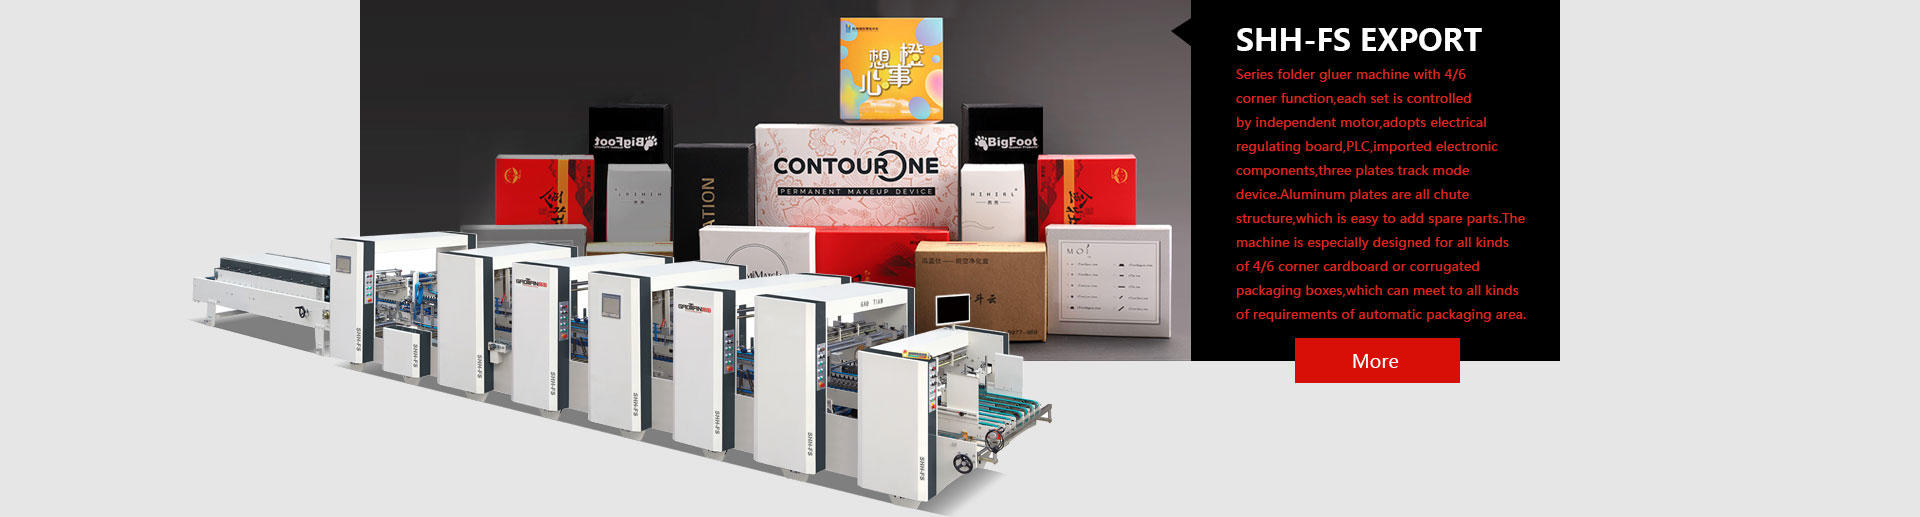 folder gluer machine with 4/6 corner function,each set is controlled by independent motor,adopts electrical regulating board,plc,imported electronic components,three plates track mode device. aluminum plates are all chute structure,which is easy to add spare parts.